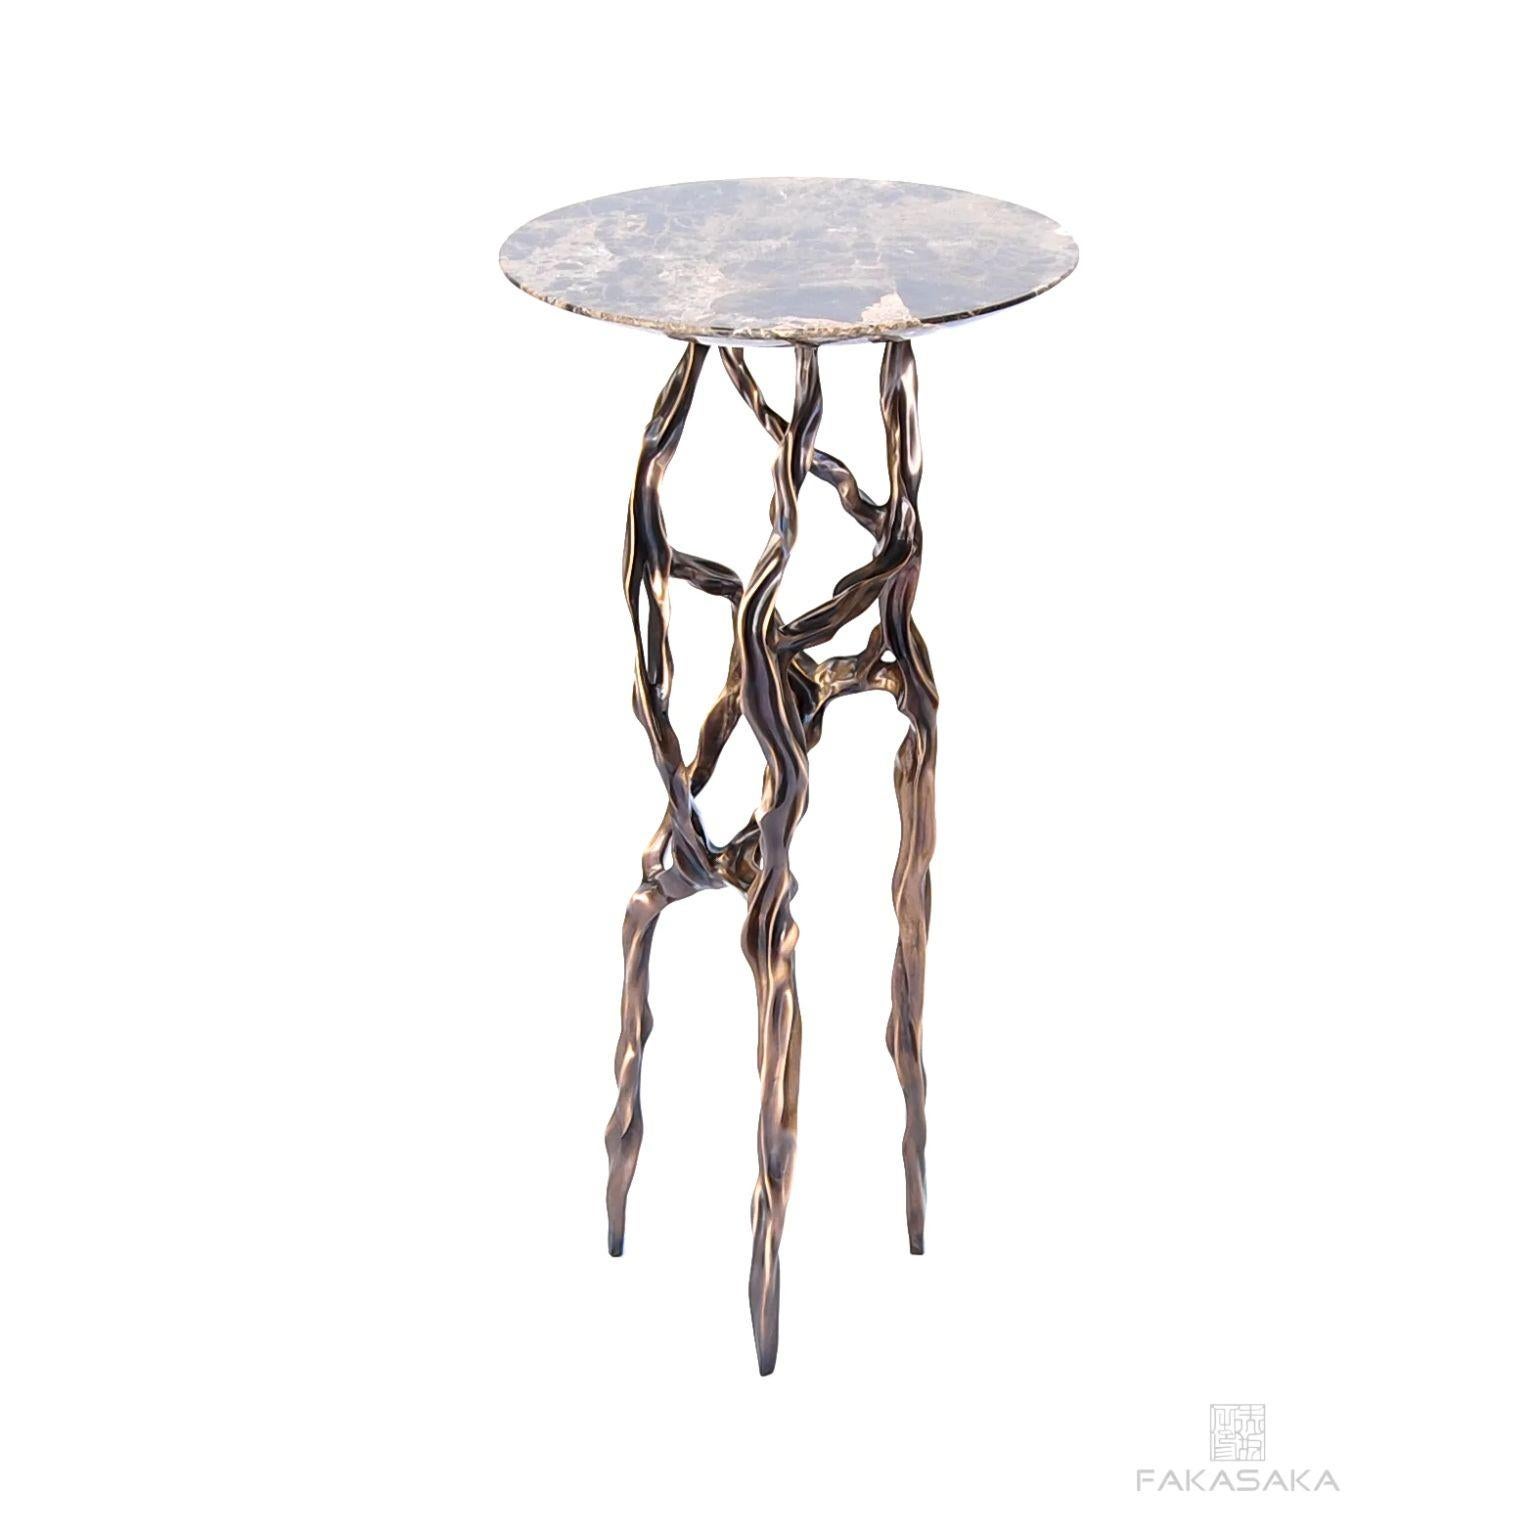 Modern Alexia Drink Table with Marrom Imperial Marble Top by Fakasaka Design For Sale